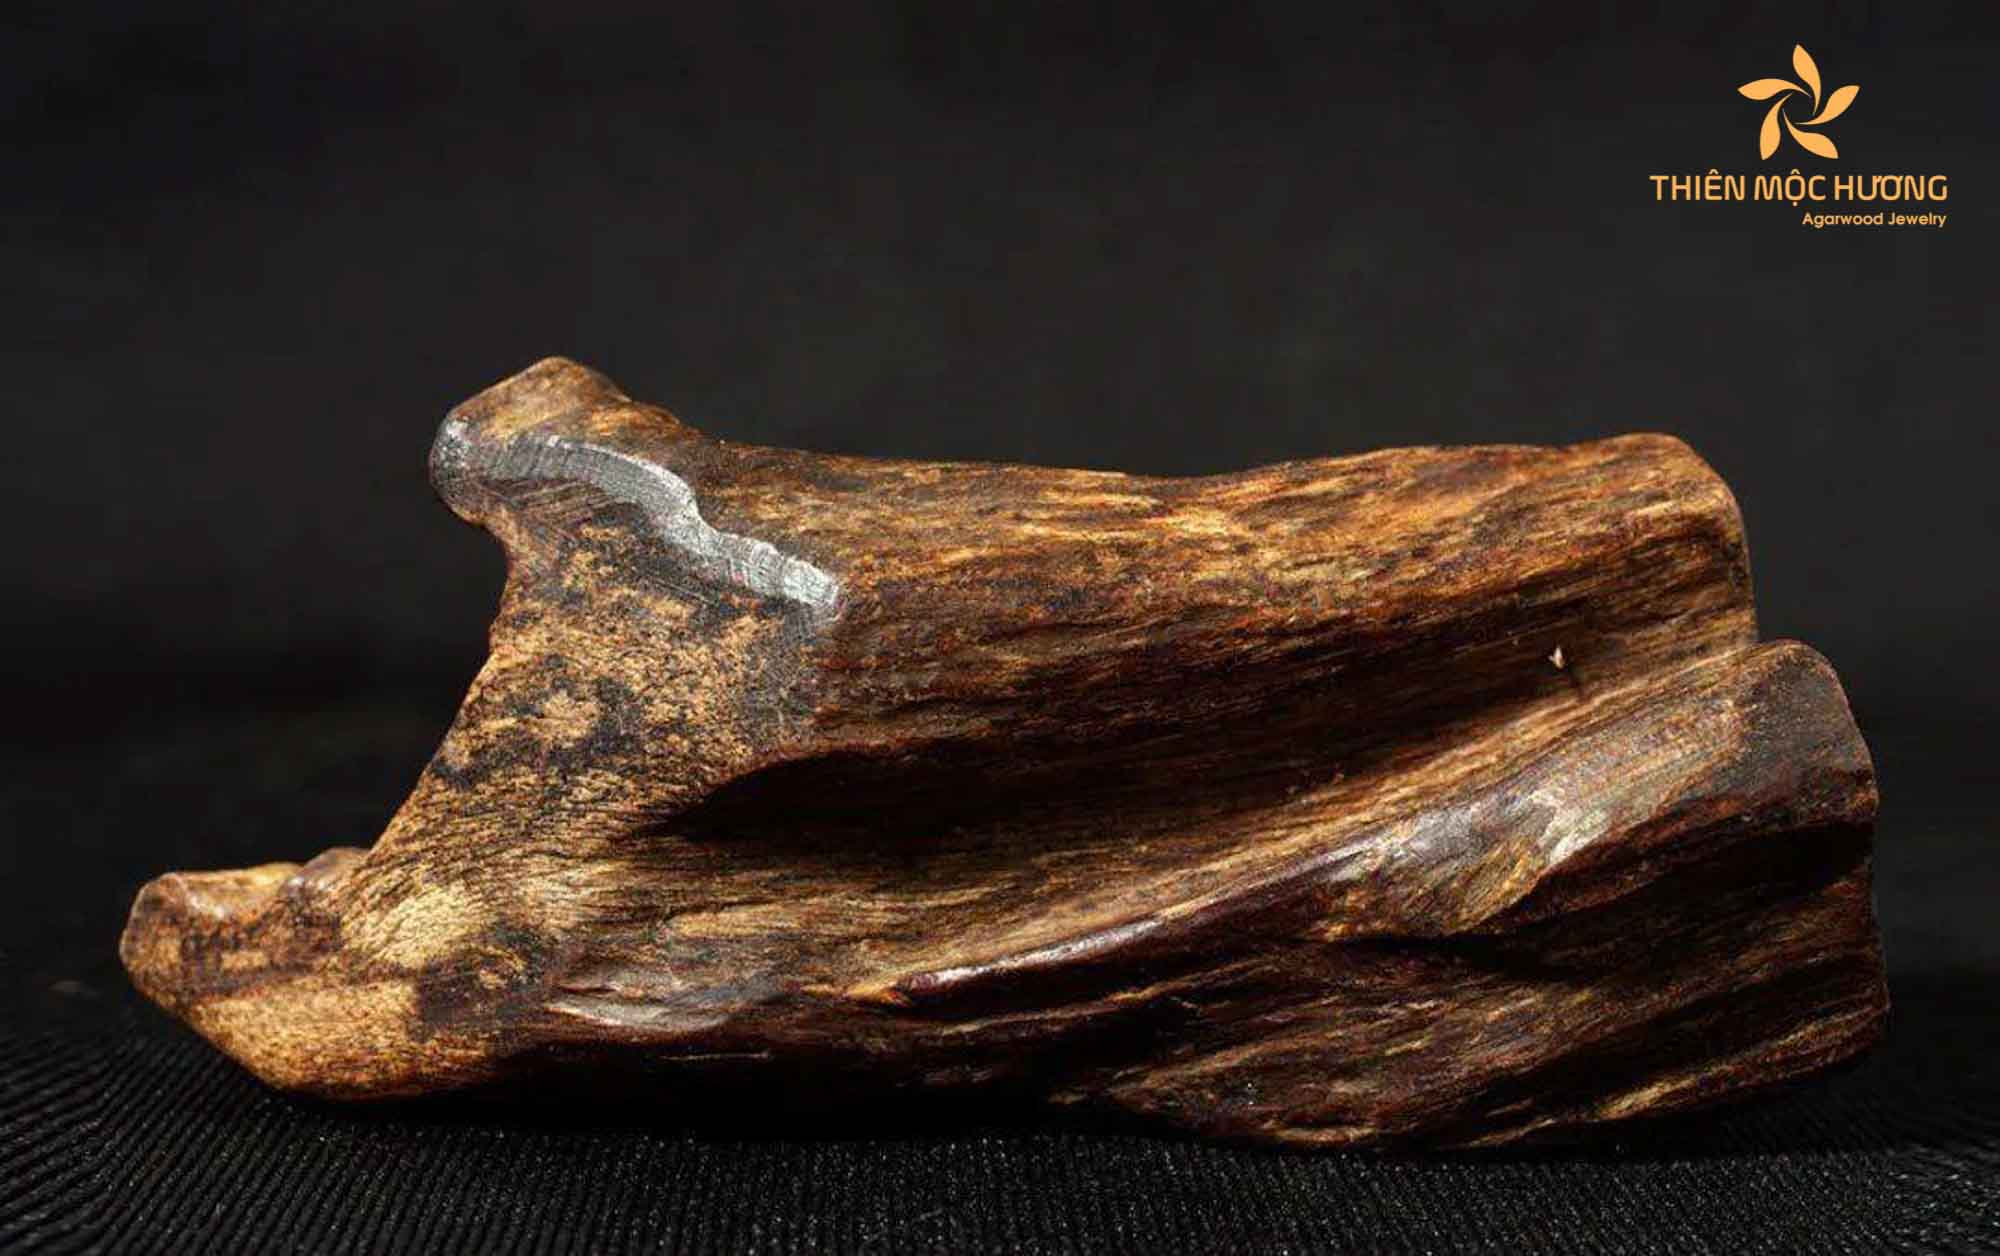 Agarwood is known for its effective anti-inflammatory effects